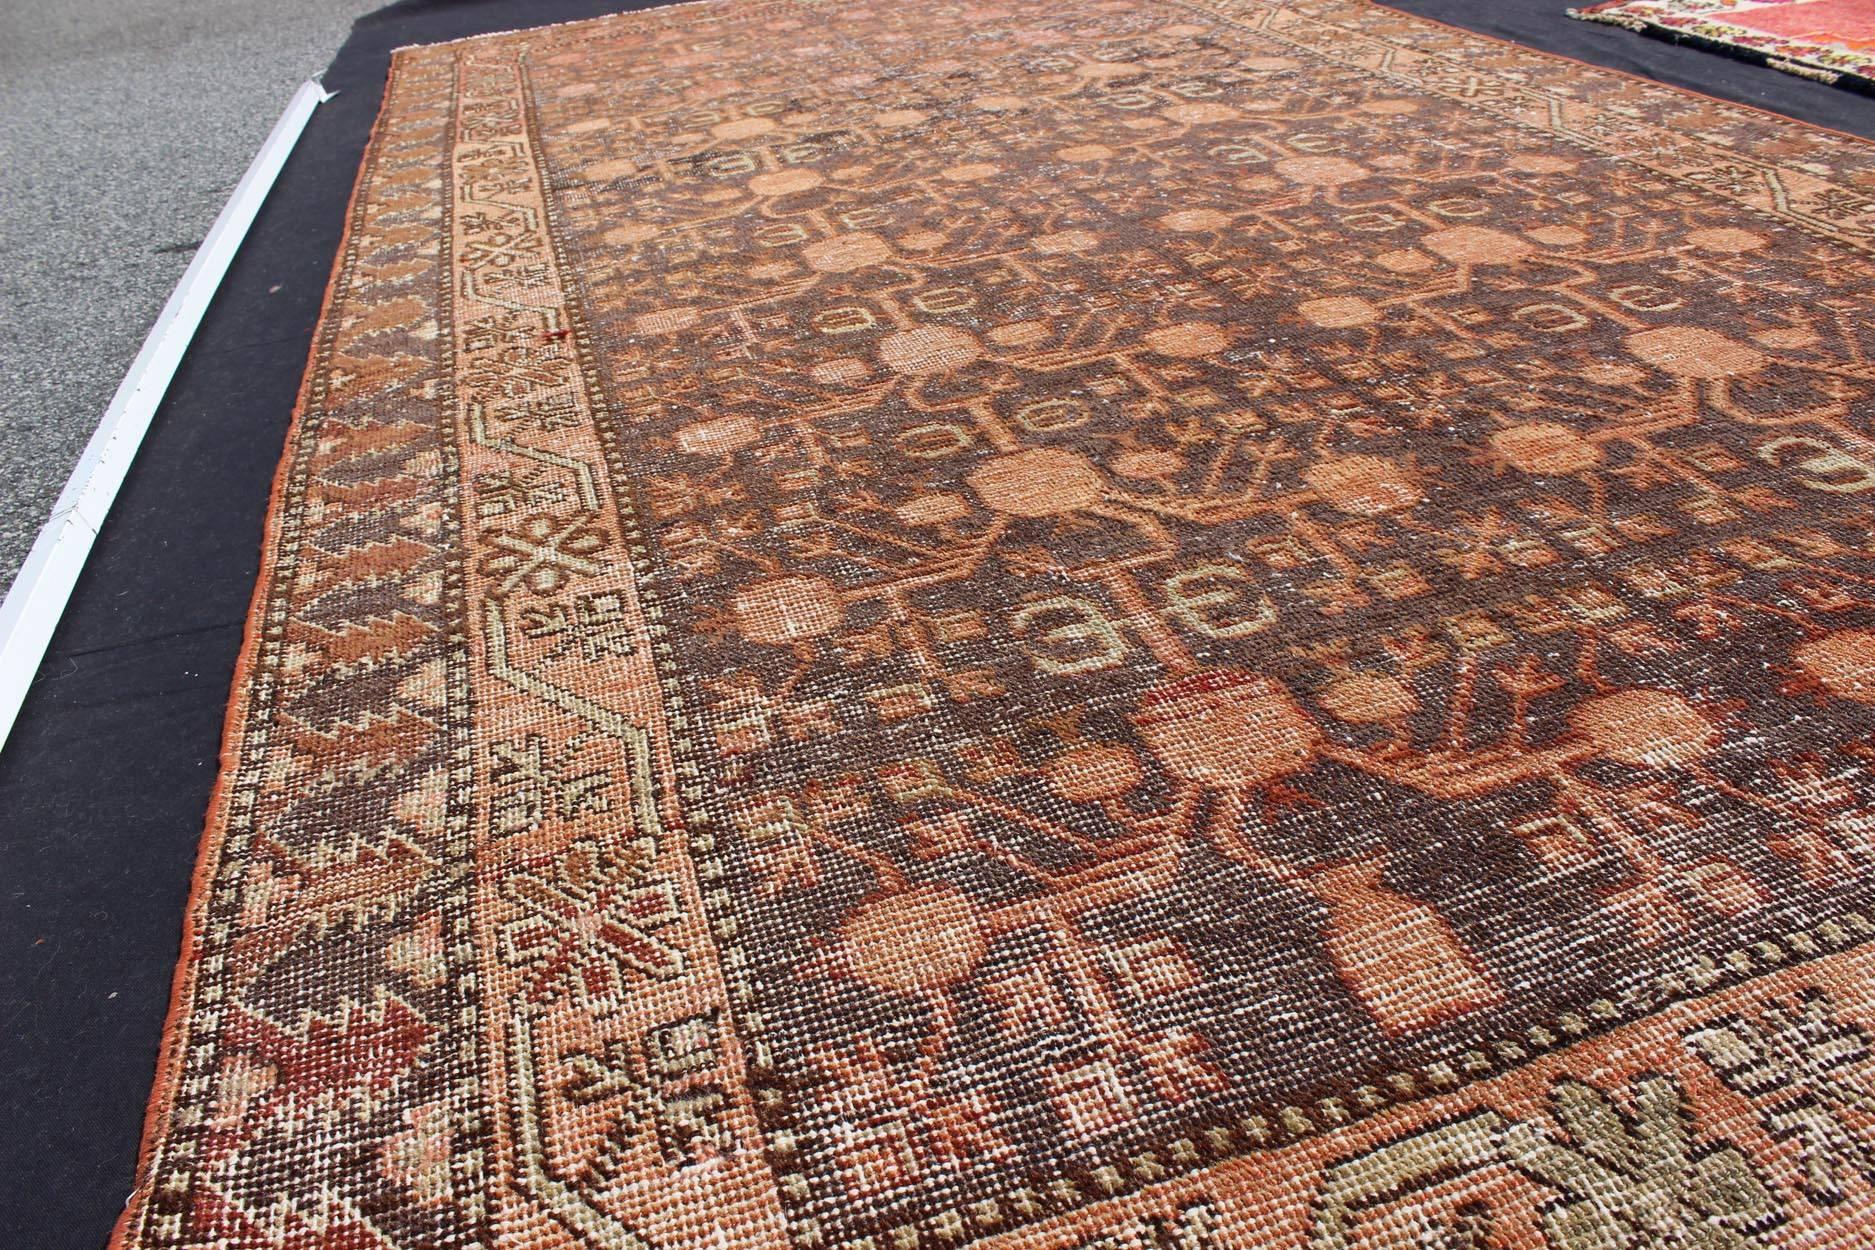 Antique Khotan Carpet in Charcoal, Burnt Red, Salmon and Taupe In Good Condition For Sale In Atlanta, GA